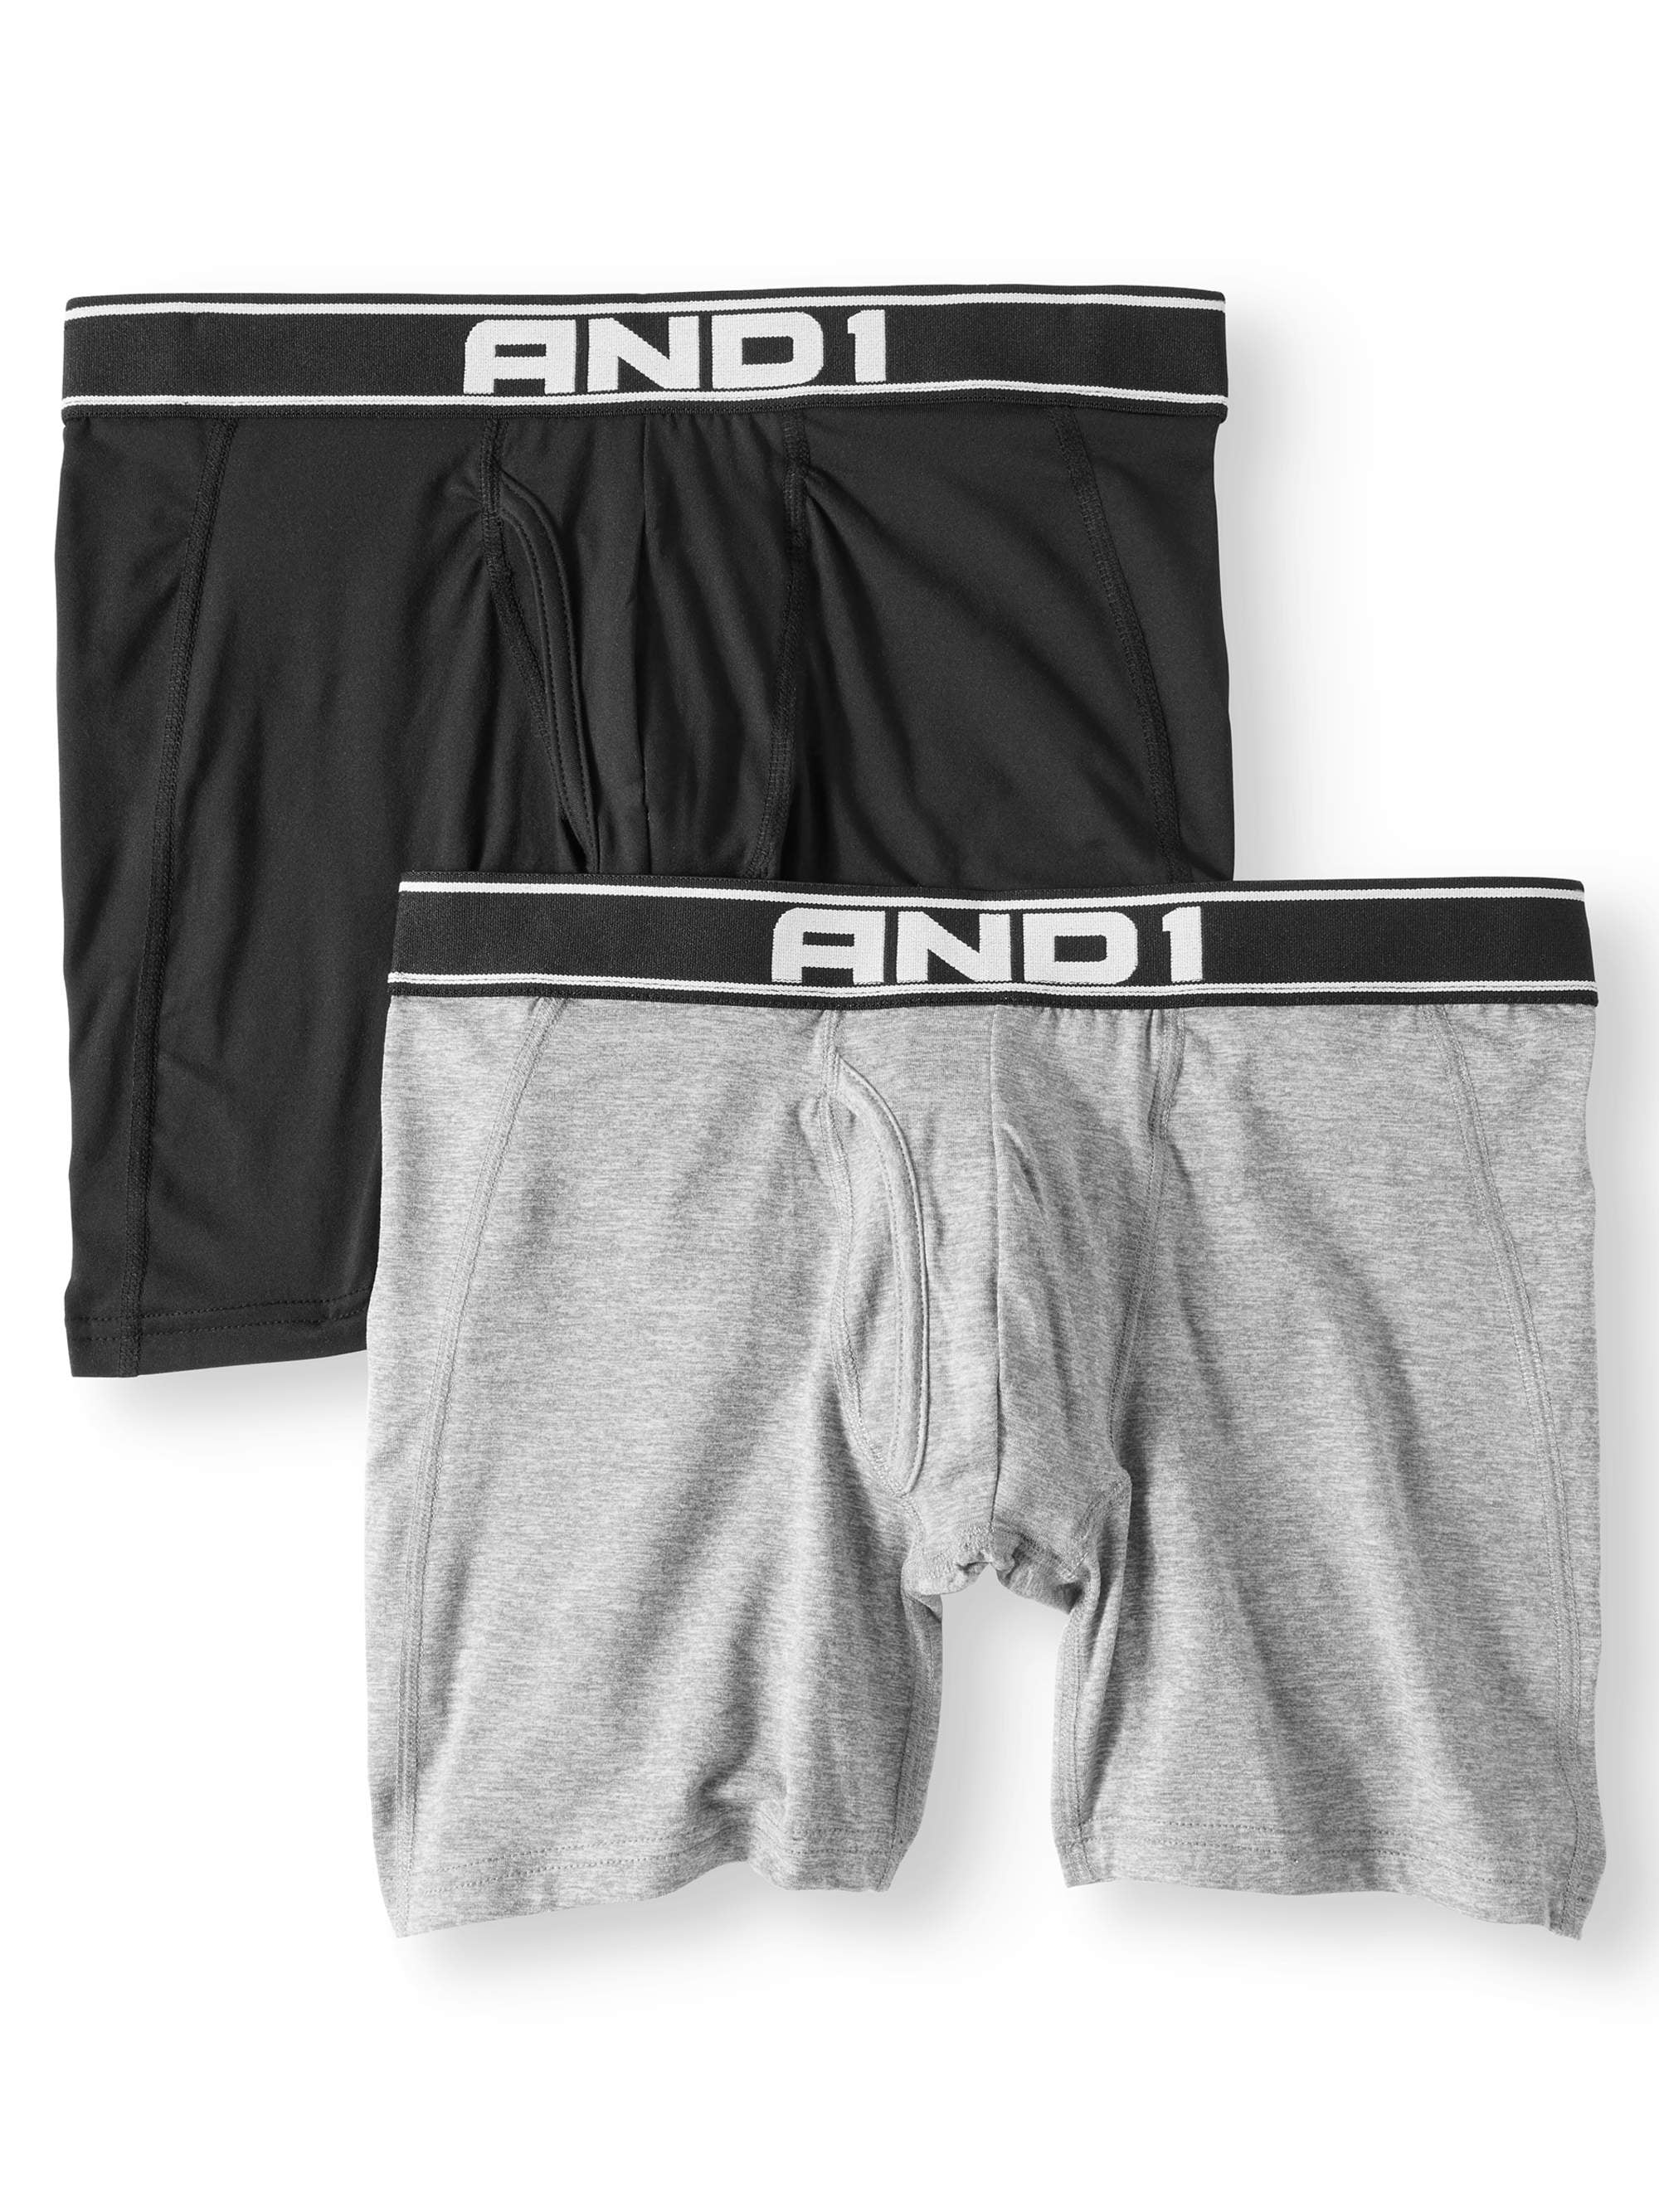  AND1 Mens Underwear - 12 Pack Performance